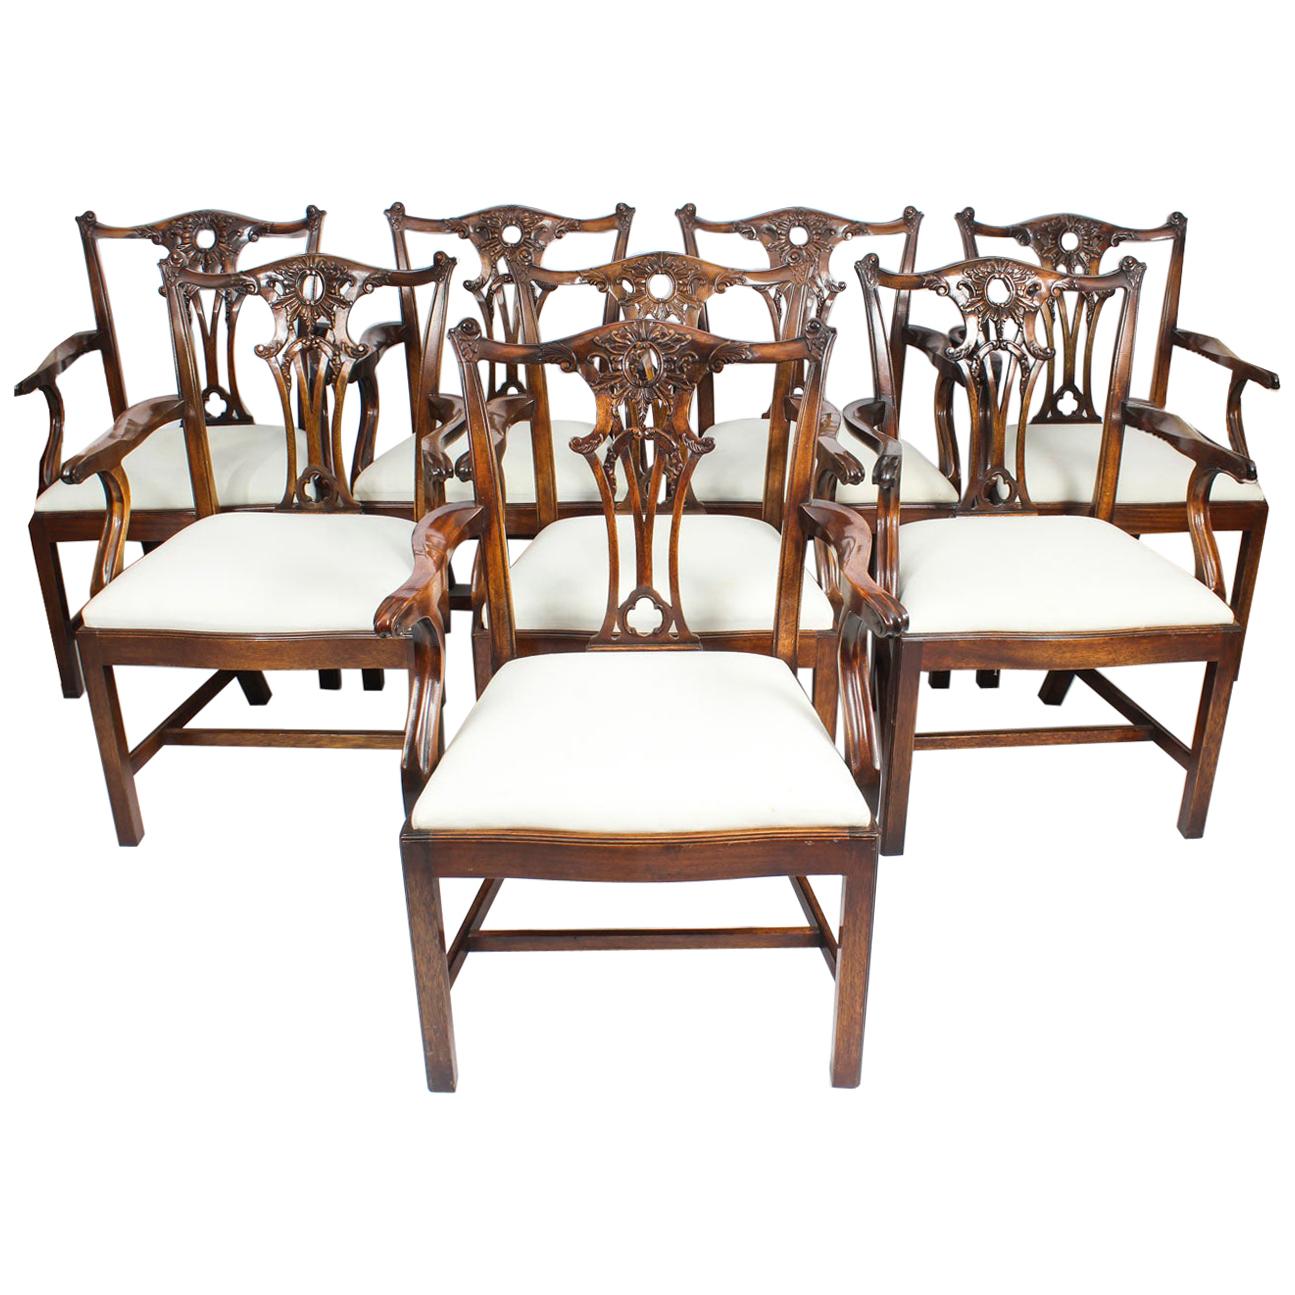 Vintage Set of 10 Mahogany Chippendale Revival Armchairs, 20th Century